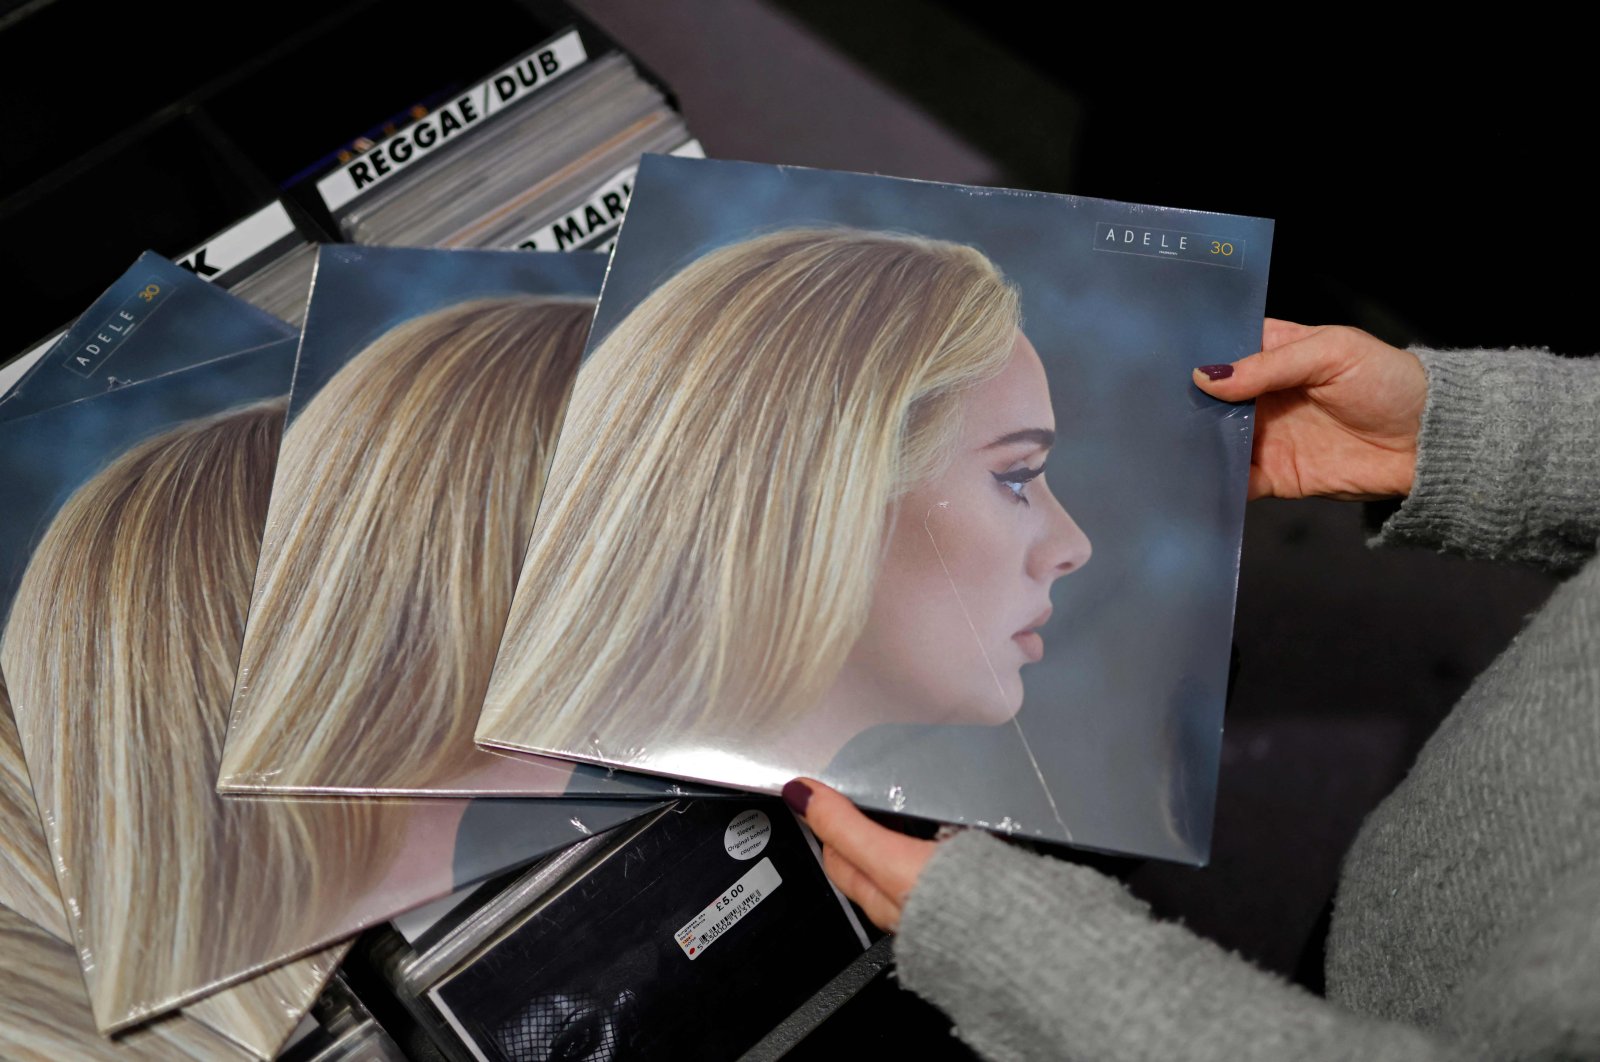 A member of staff sorts copies of the new album from British singer-songwriter Adele titled &quot;30,&quot; in Sister Ray record store in Soho, central London, U.K., Nov. 19, 2021. (AFP)